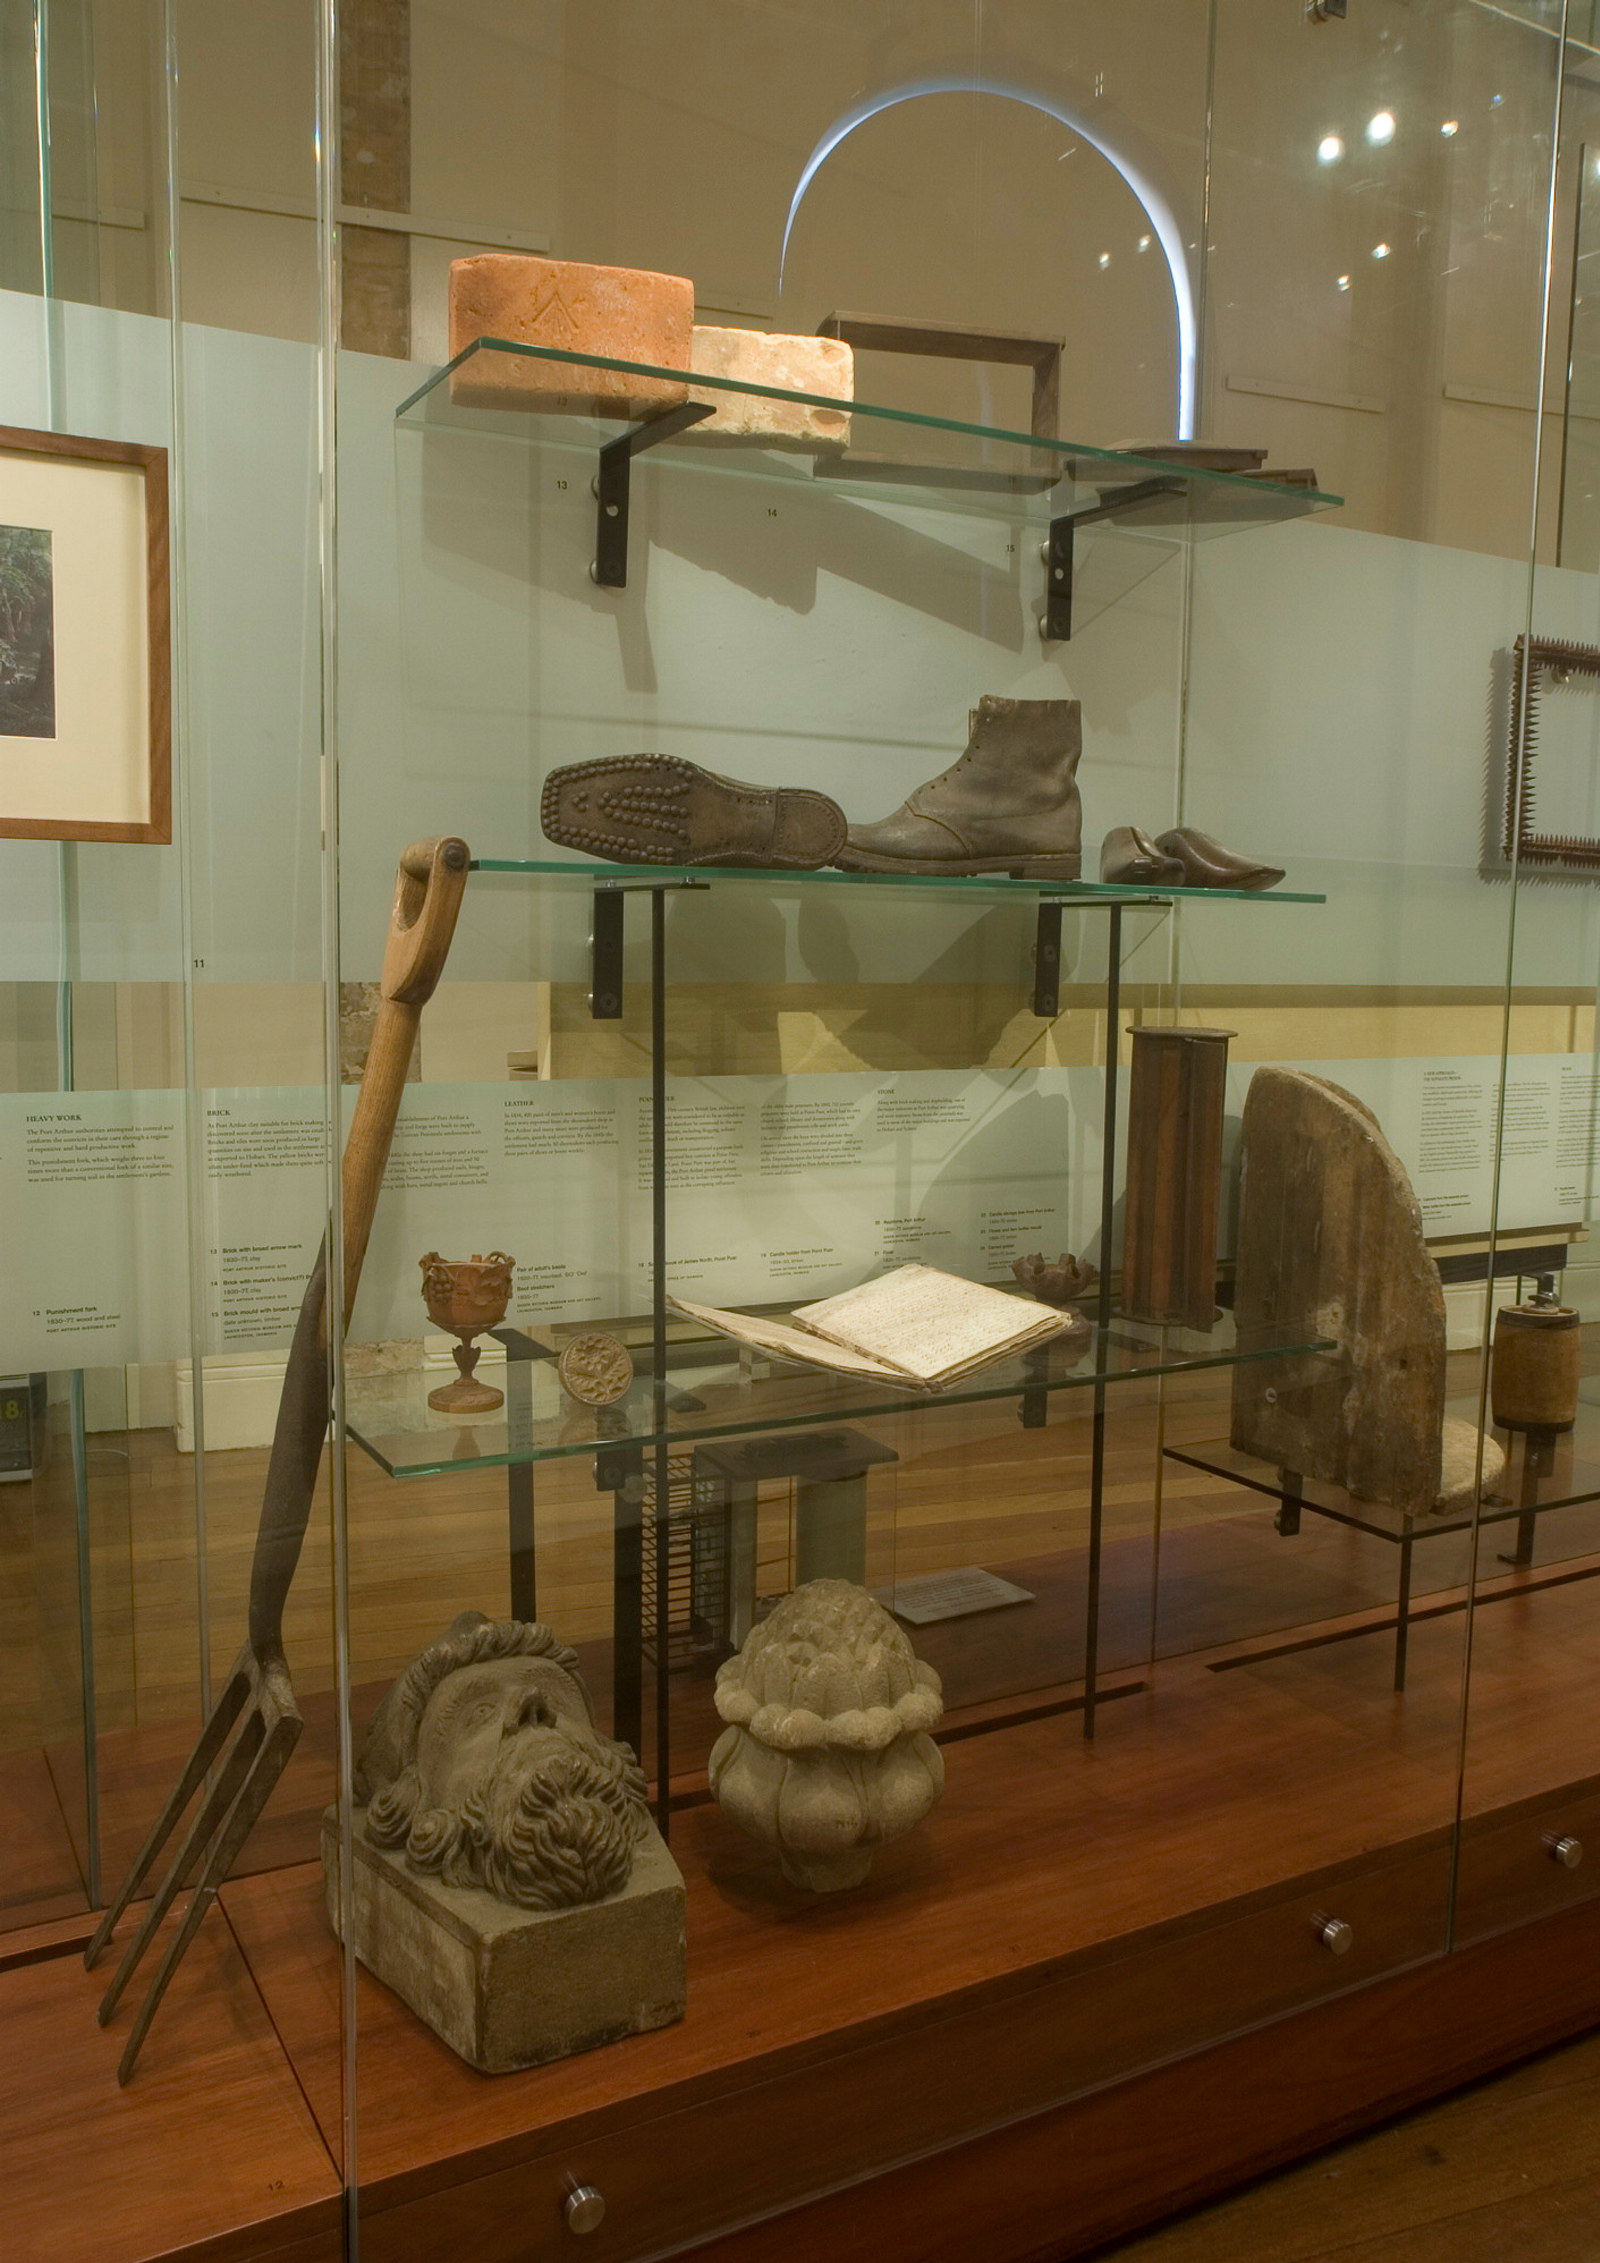 Documentation of Convicts: sites of punishment exhibition showing building tools and objects